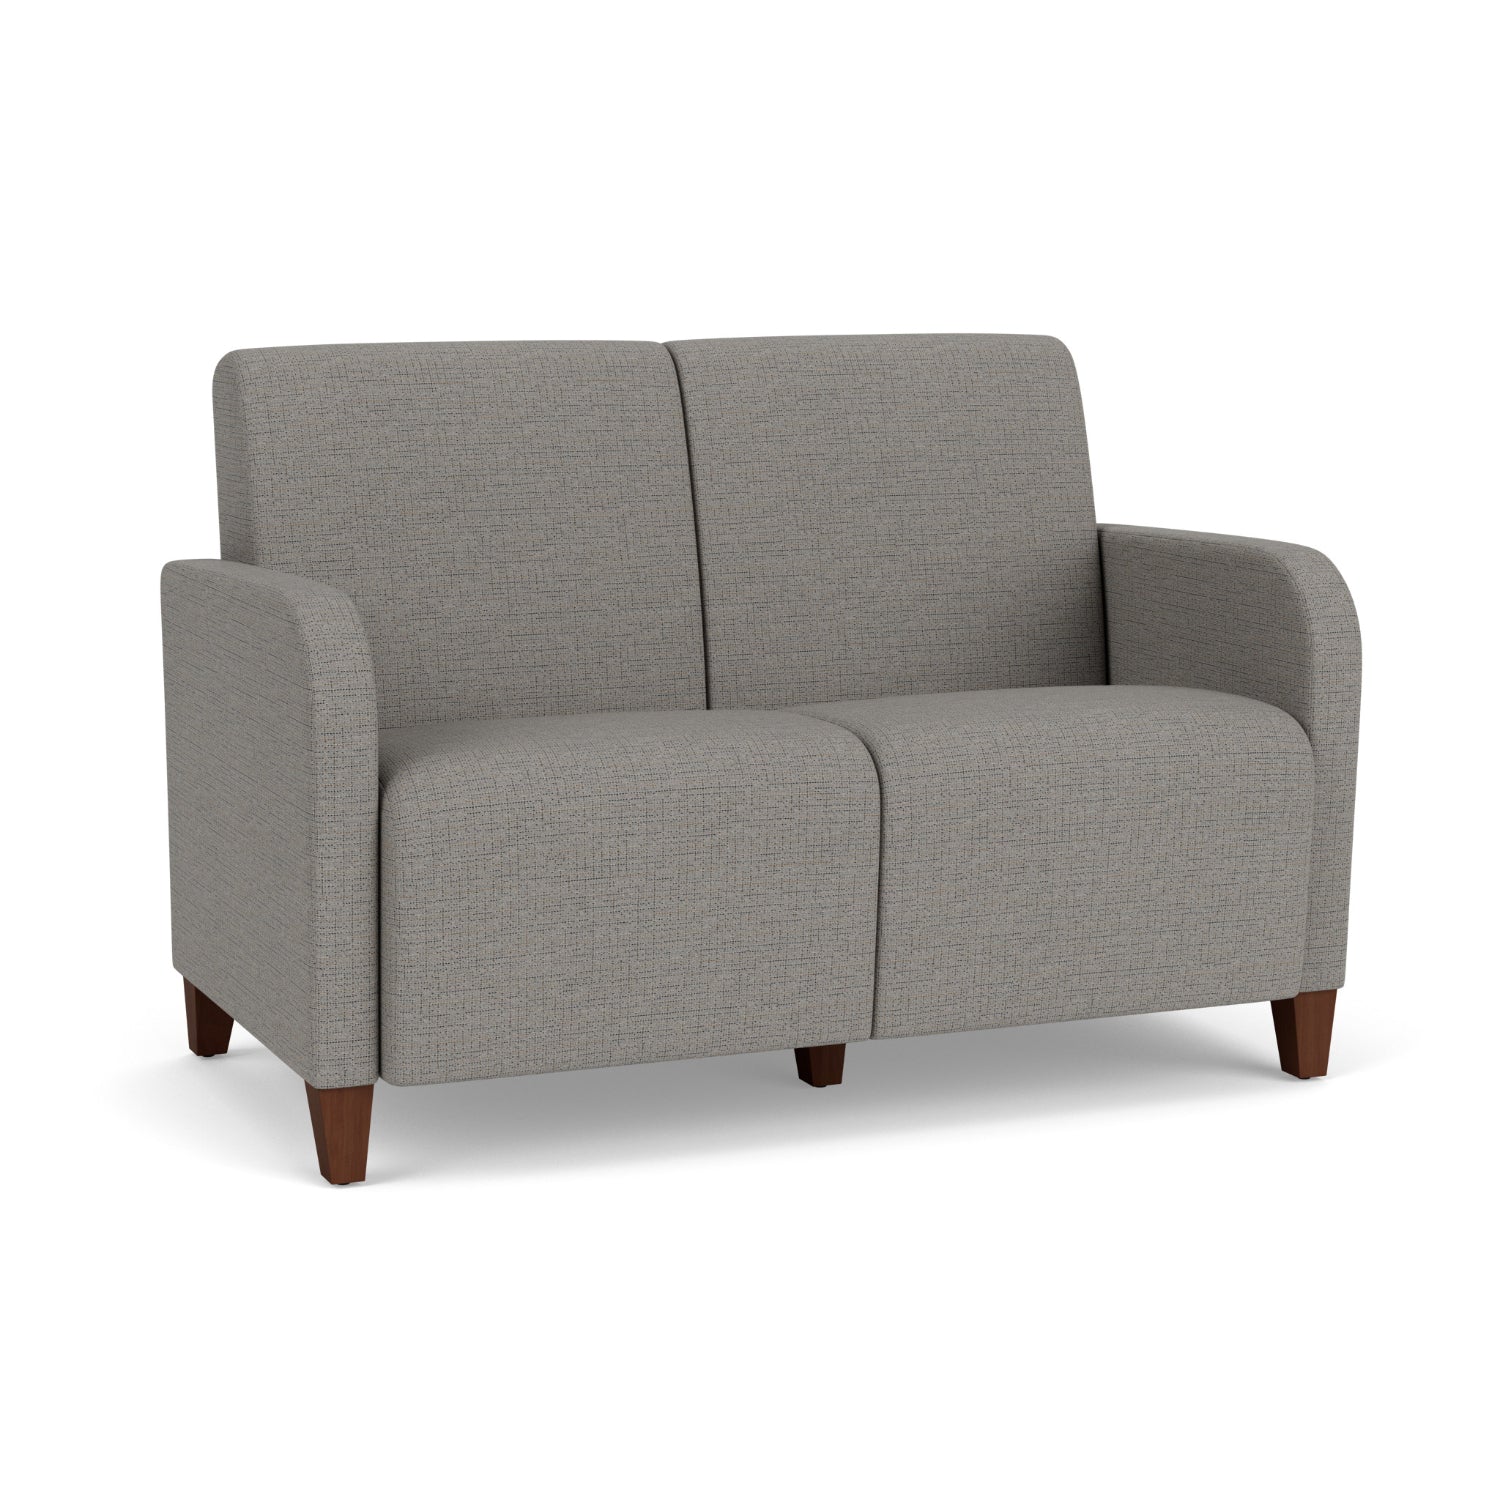 Siena Collection Reception Seating, 2-Seat Sofa, Designer Fabric Upholstery, FREE SHIPPING